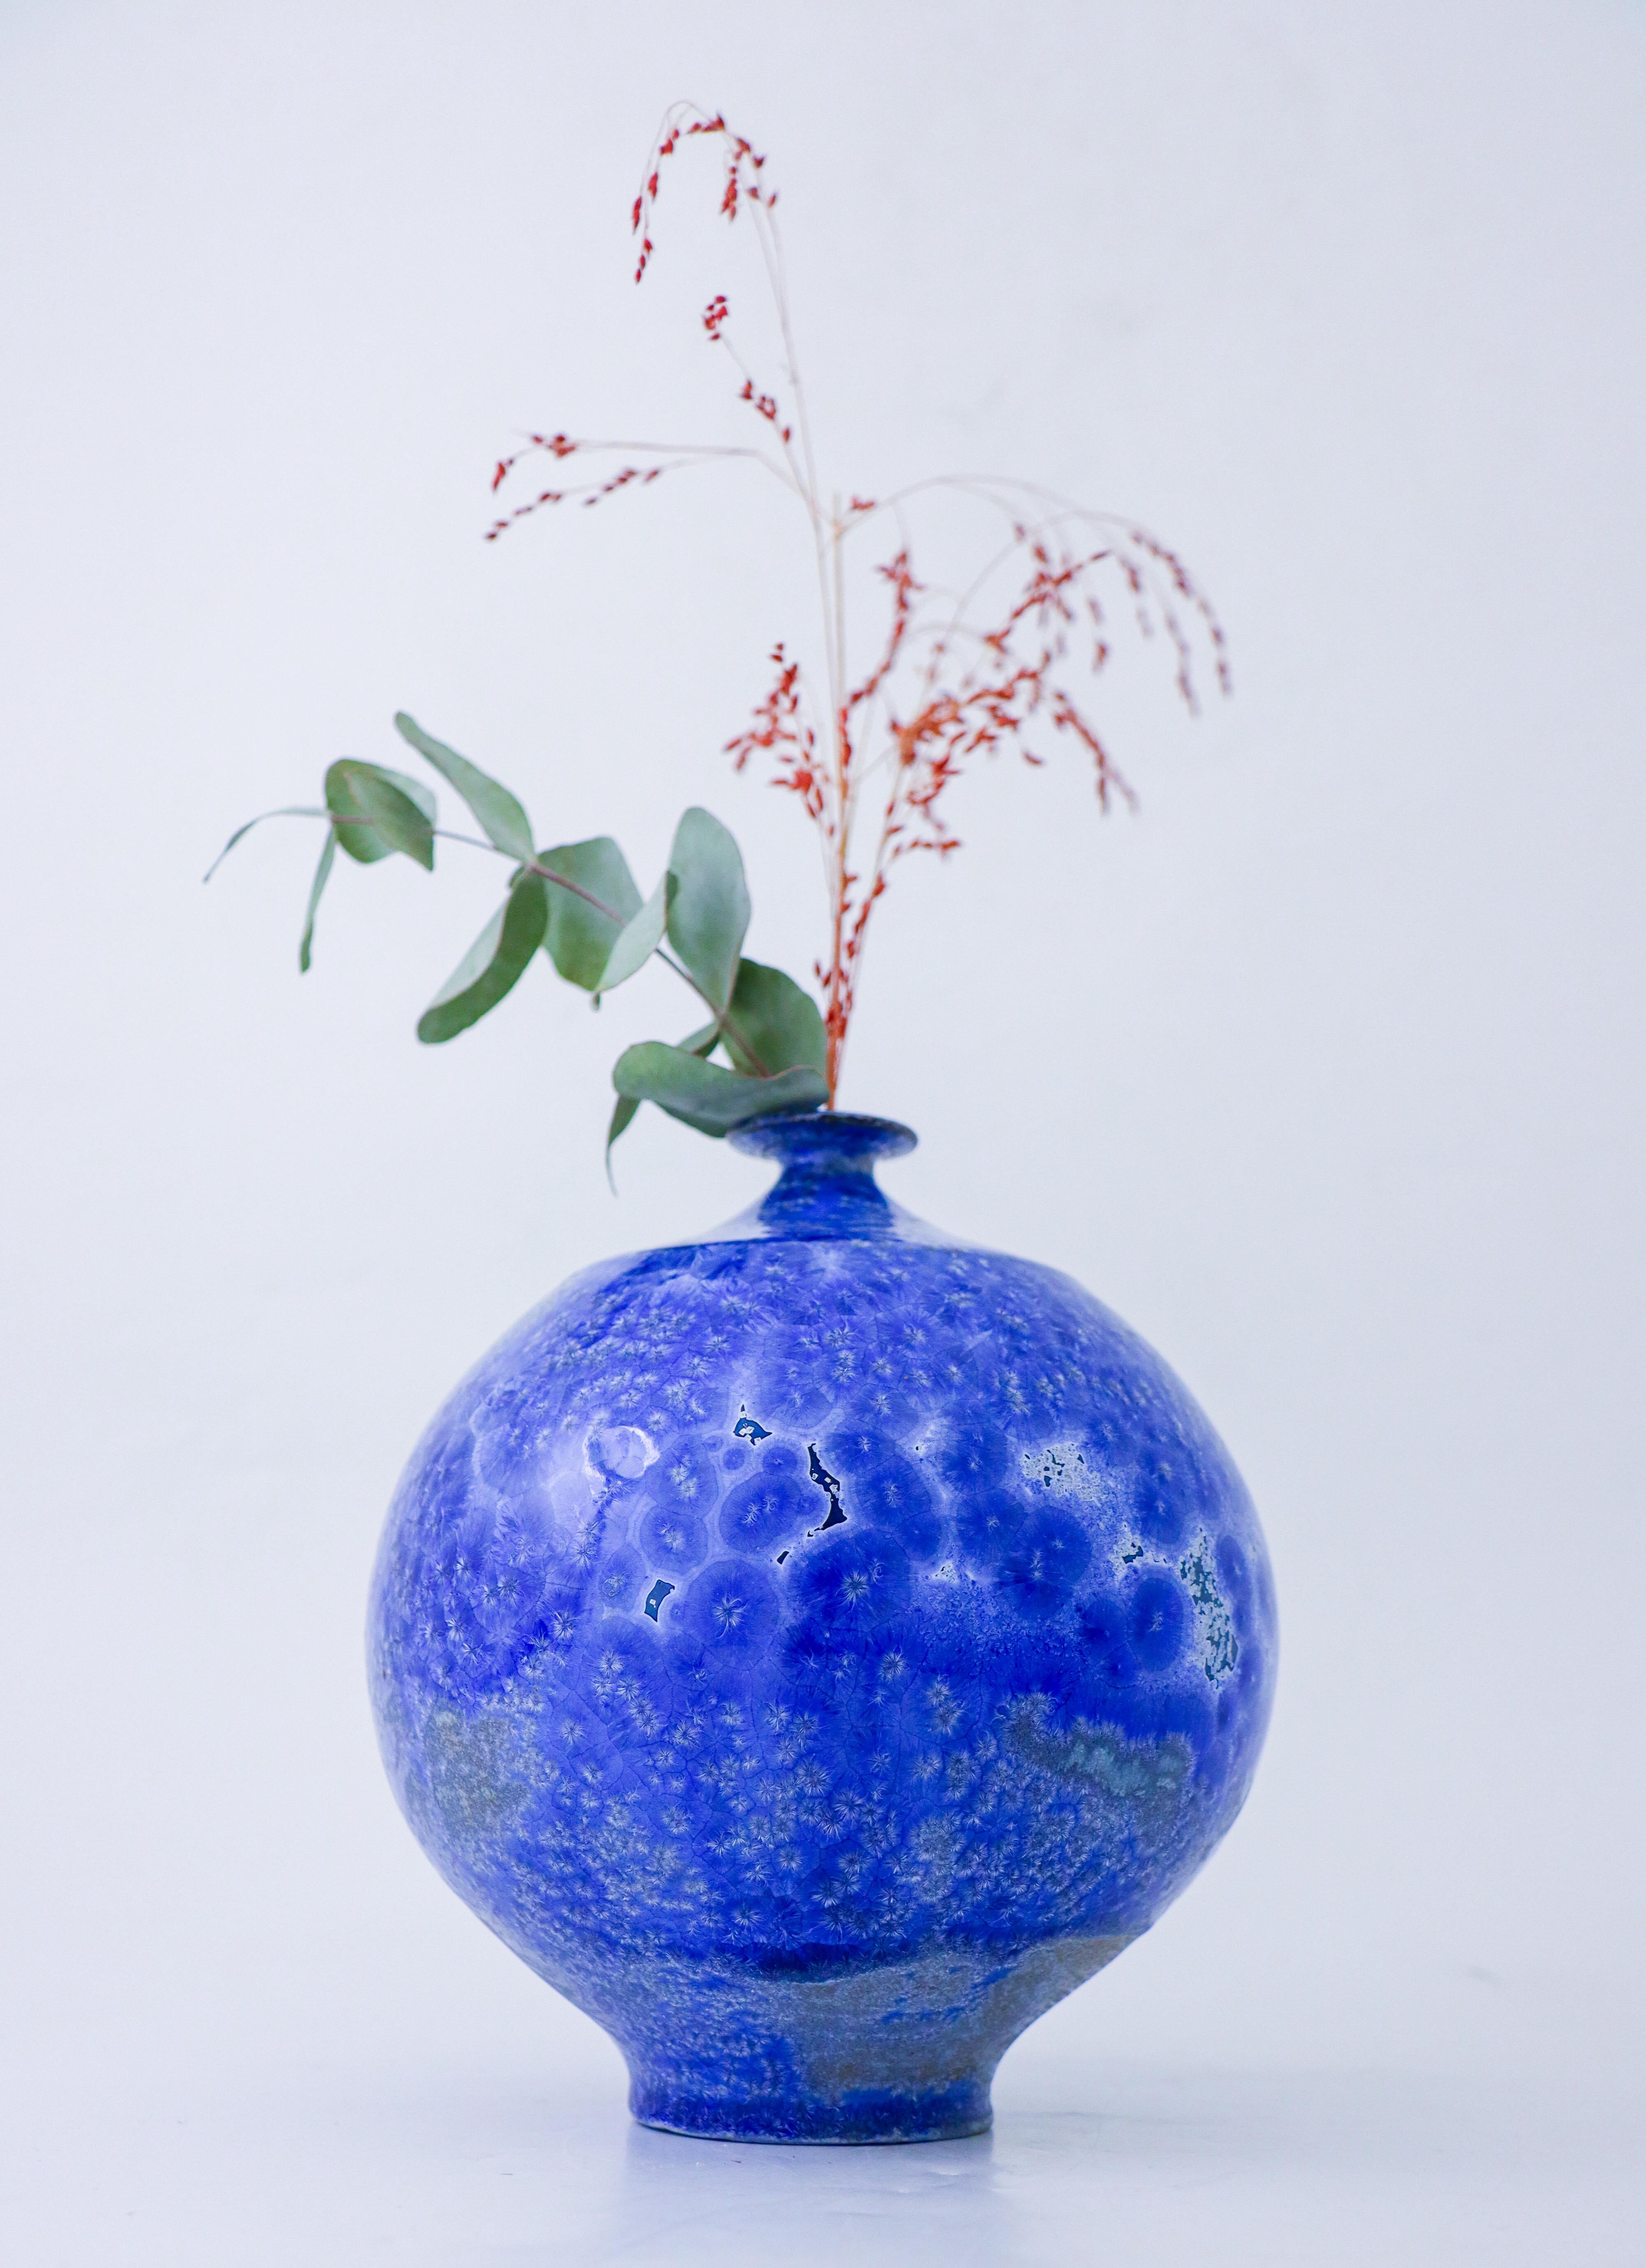 This stunning blue ceramic vase by Isak Isaksson is a true masterpiece of contemporary art pottery. The glossy finish and abstract pattern make it a unique piece that will enhance any decor. Measuring 18 cm in height and signed by the artist